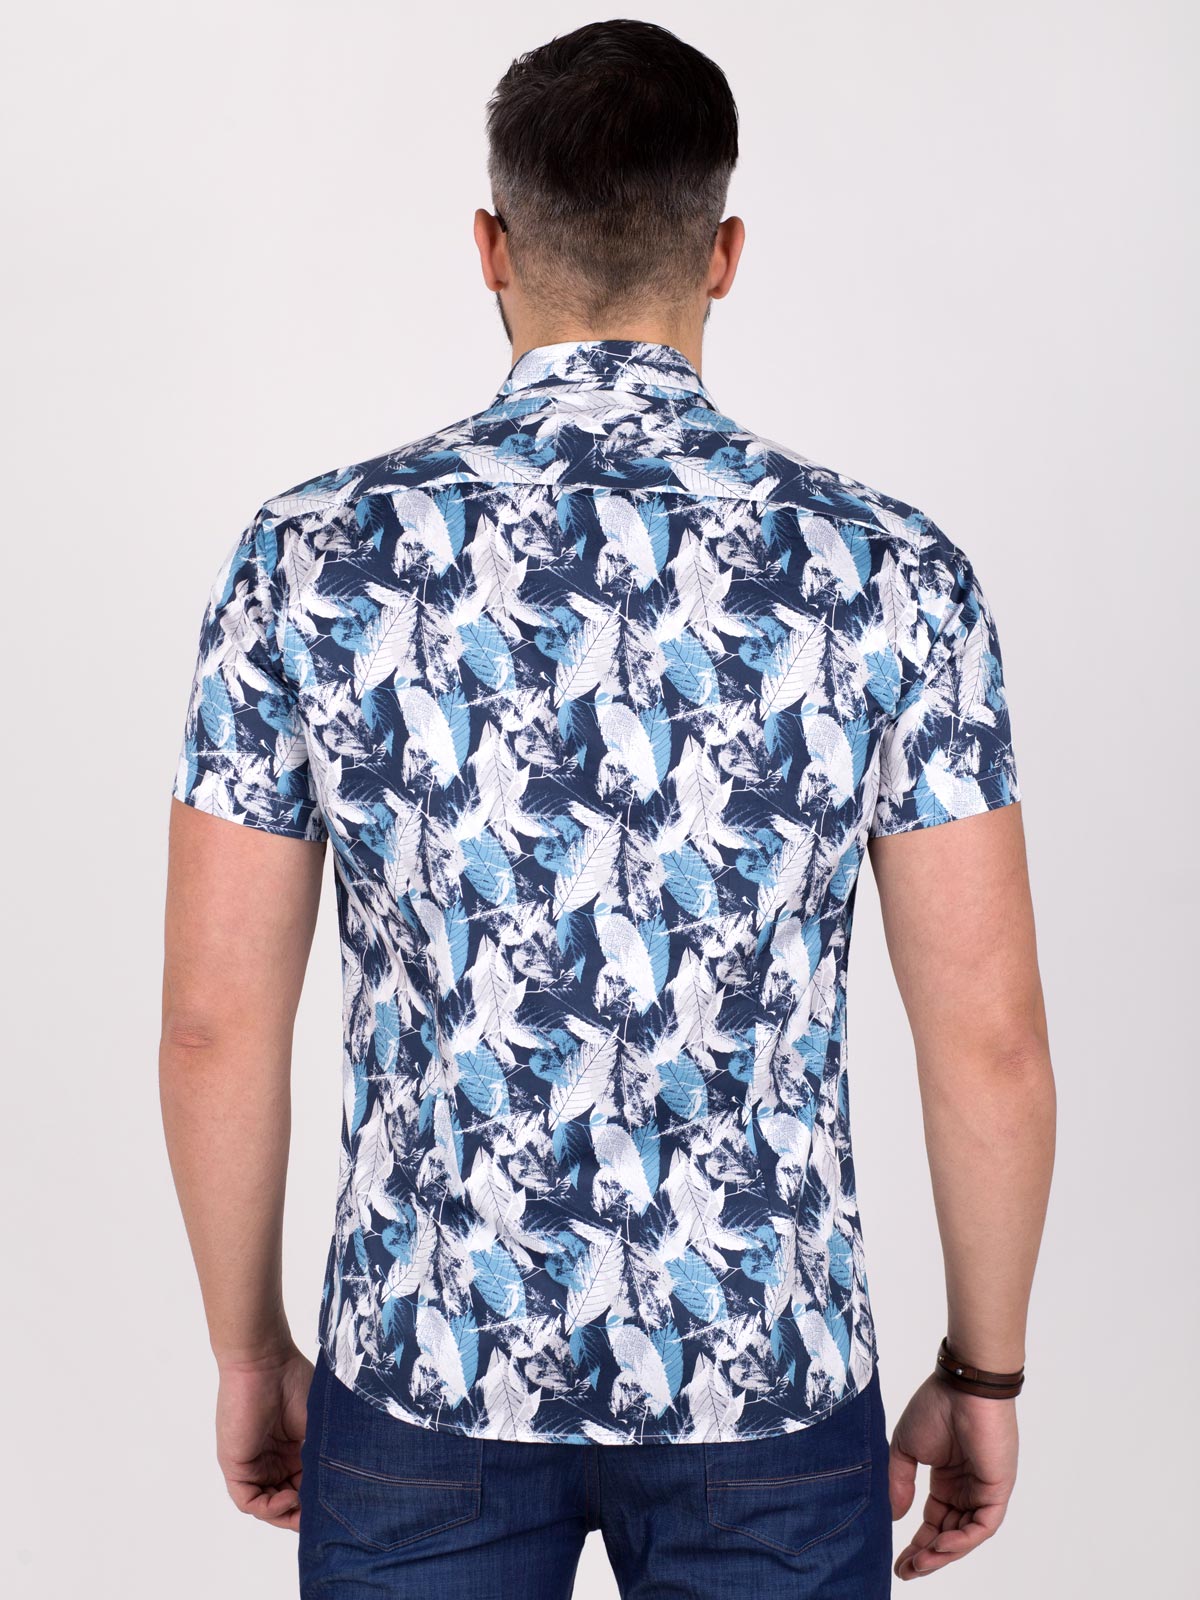 Shirt in white with blue leaf print - 80198 € 16.31 img3